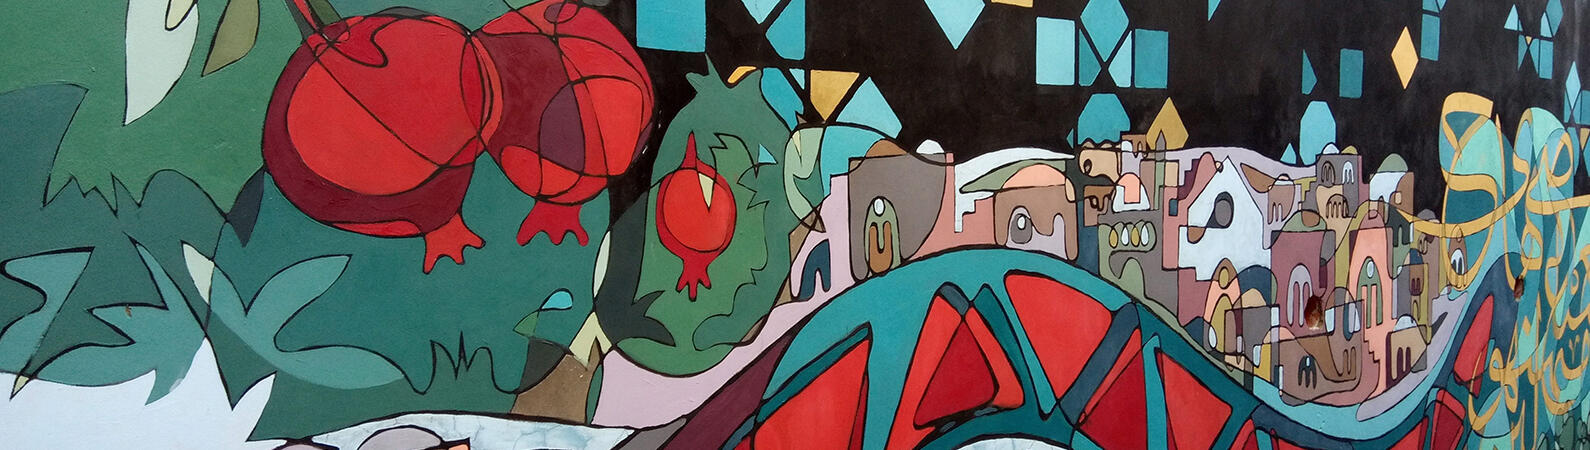 Mural painted on a wall showing pomegranates, buildings, and abstract shapes